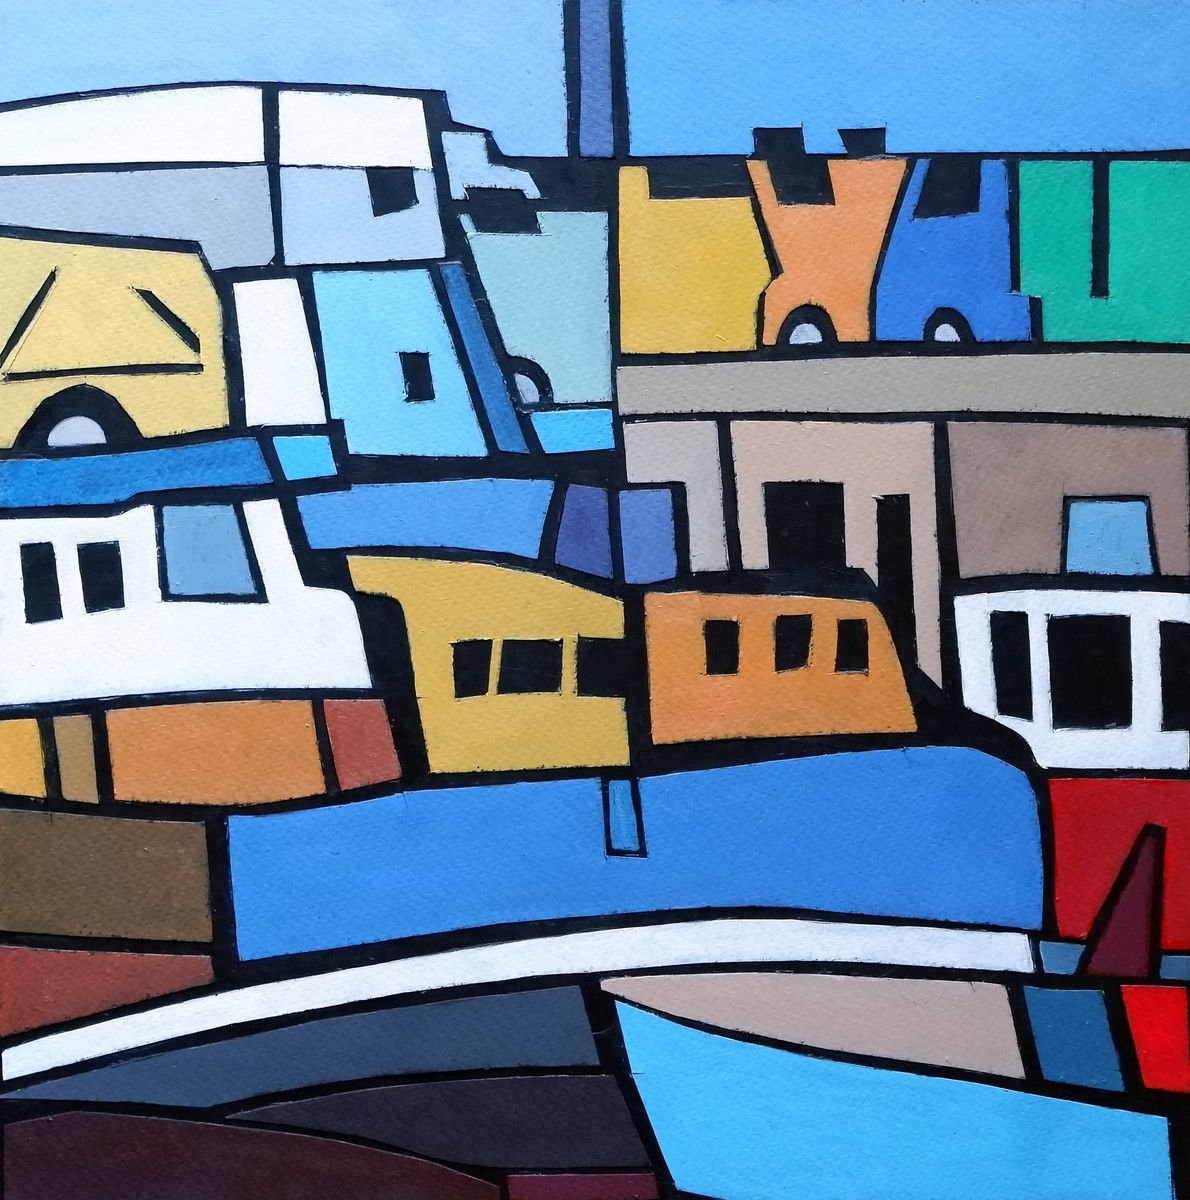 Transport Trucks and Trawlers, Newlyn Harbour by Tim Treagust